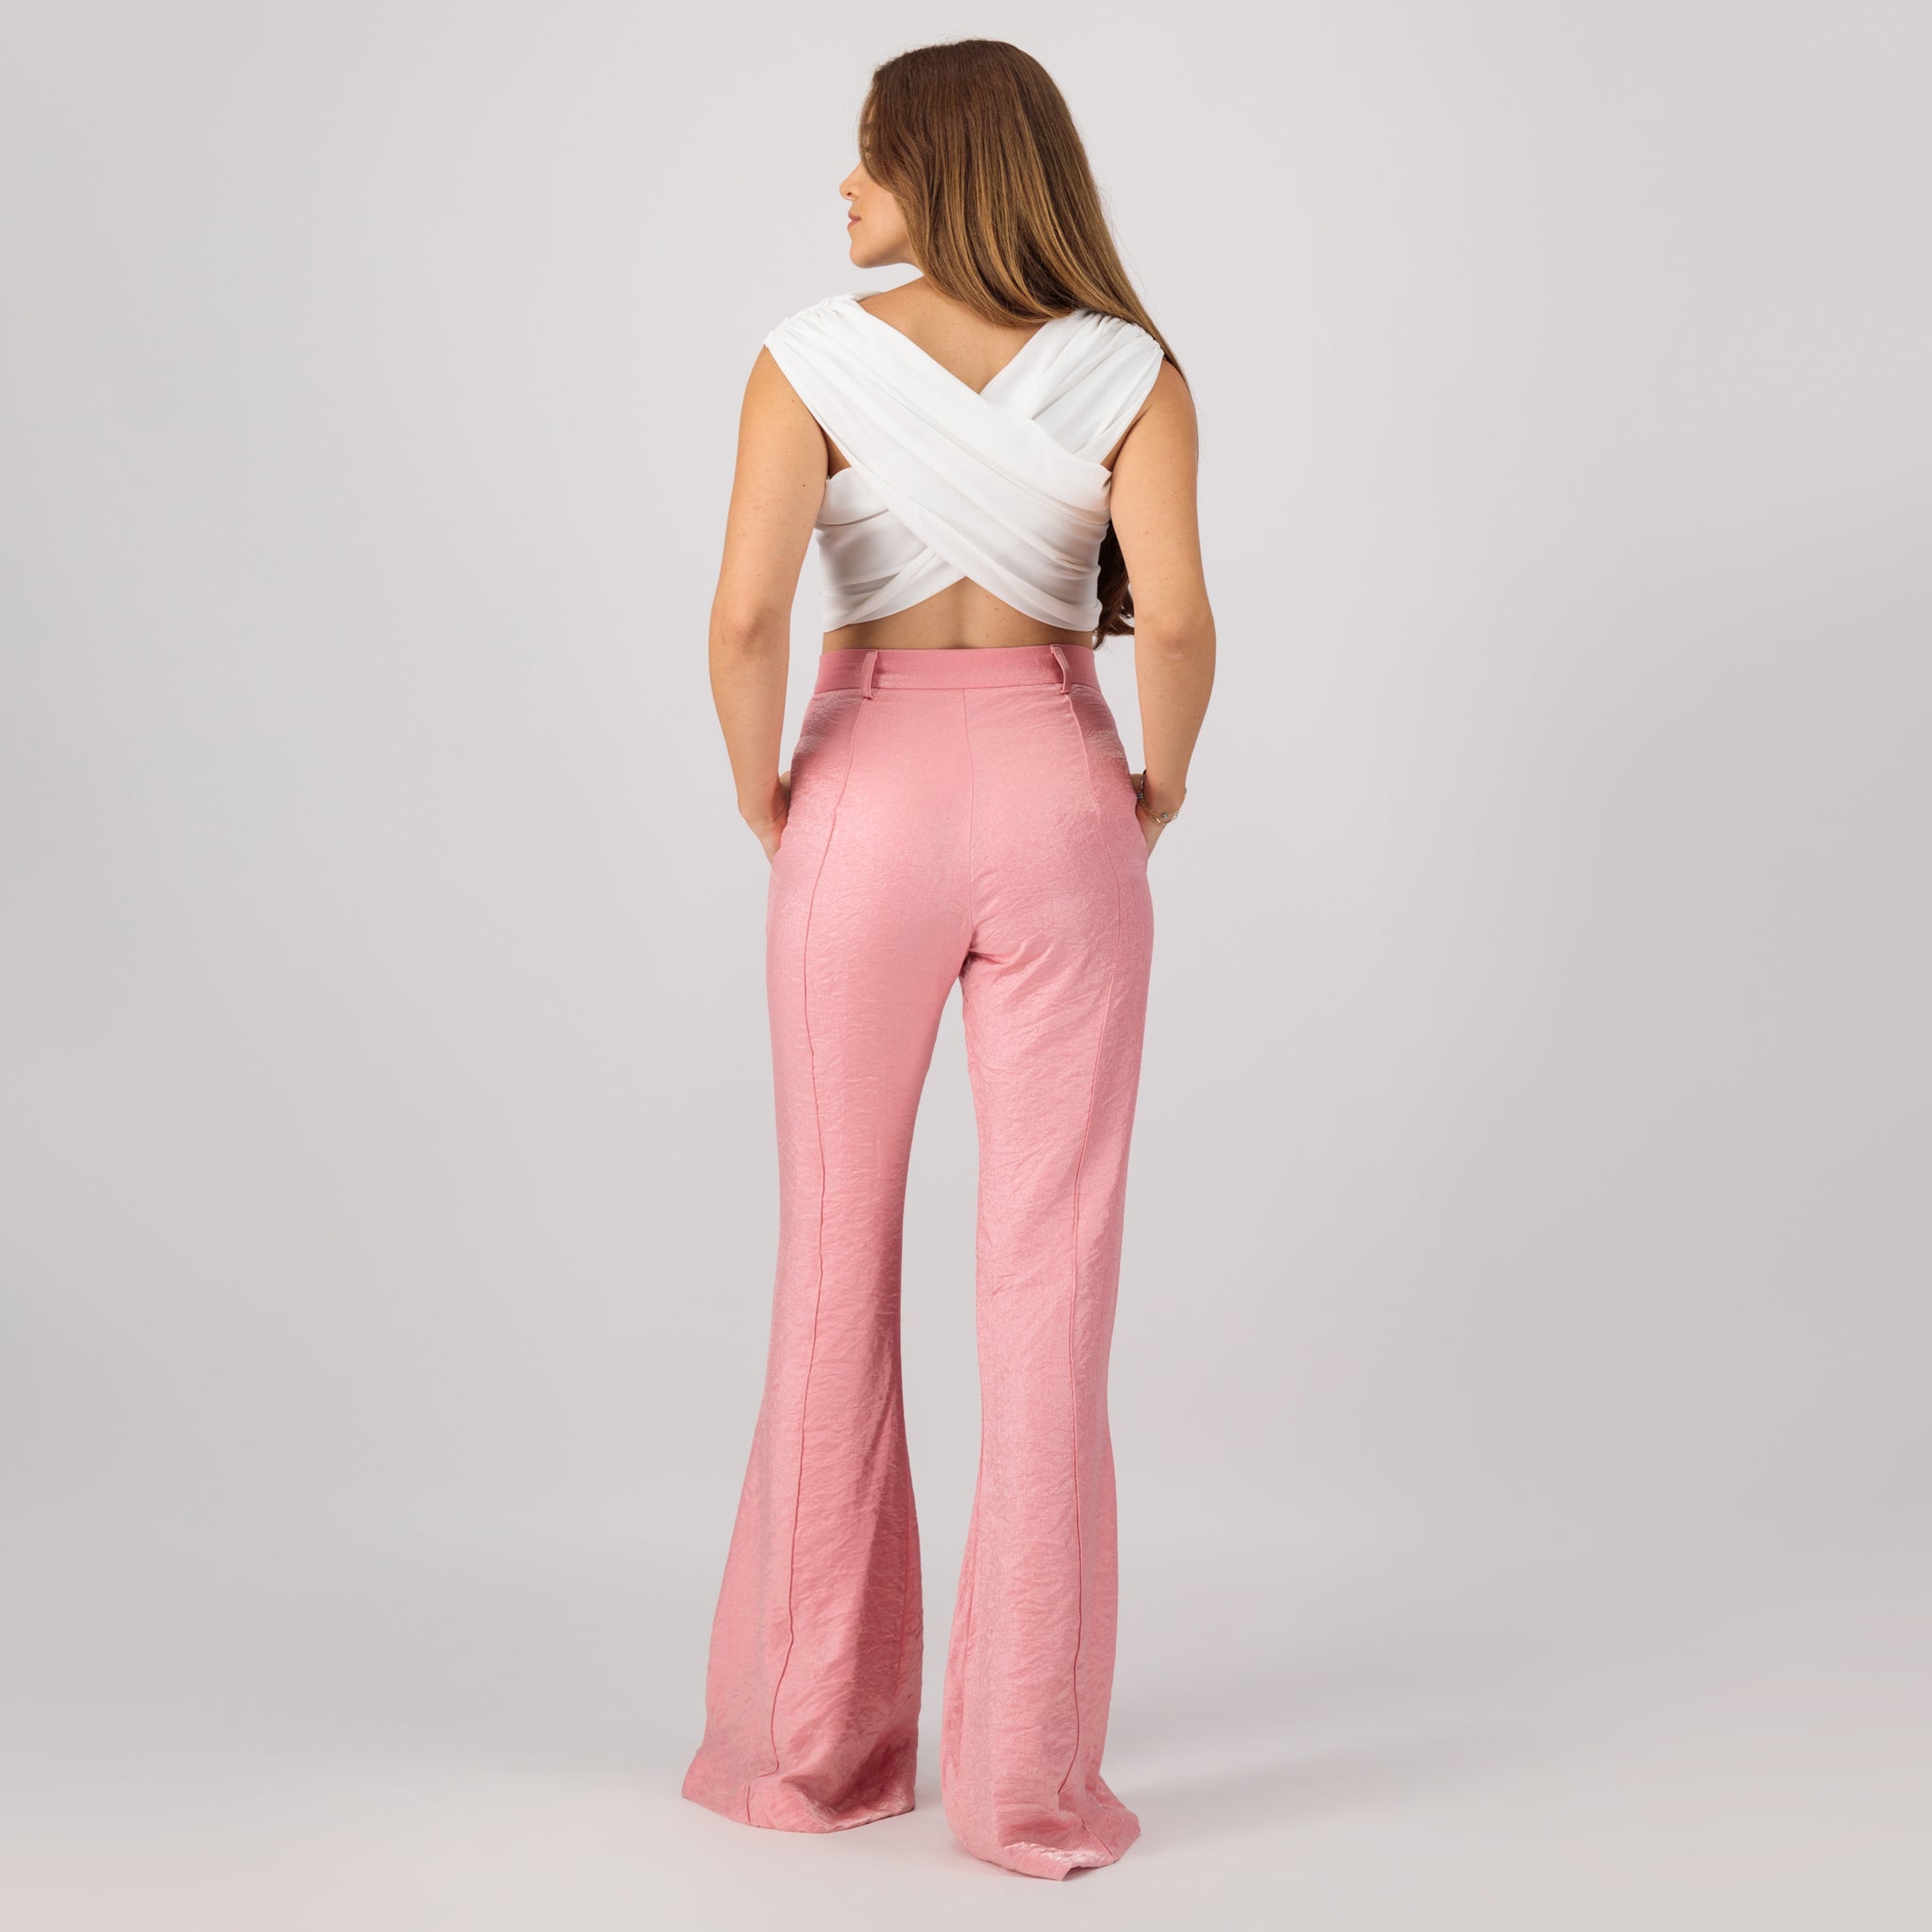 Crushed blush pink and silver shimmer high-waist palazzo pants, reflecting  a contemporary and stylish design.